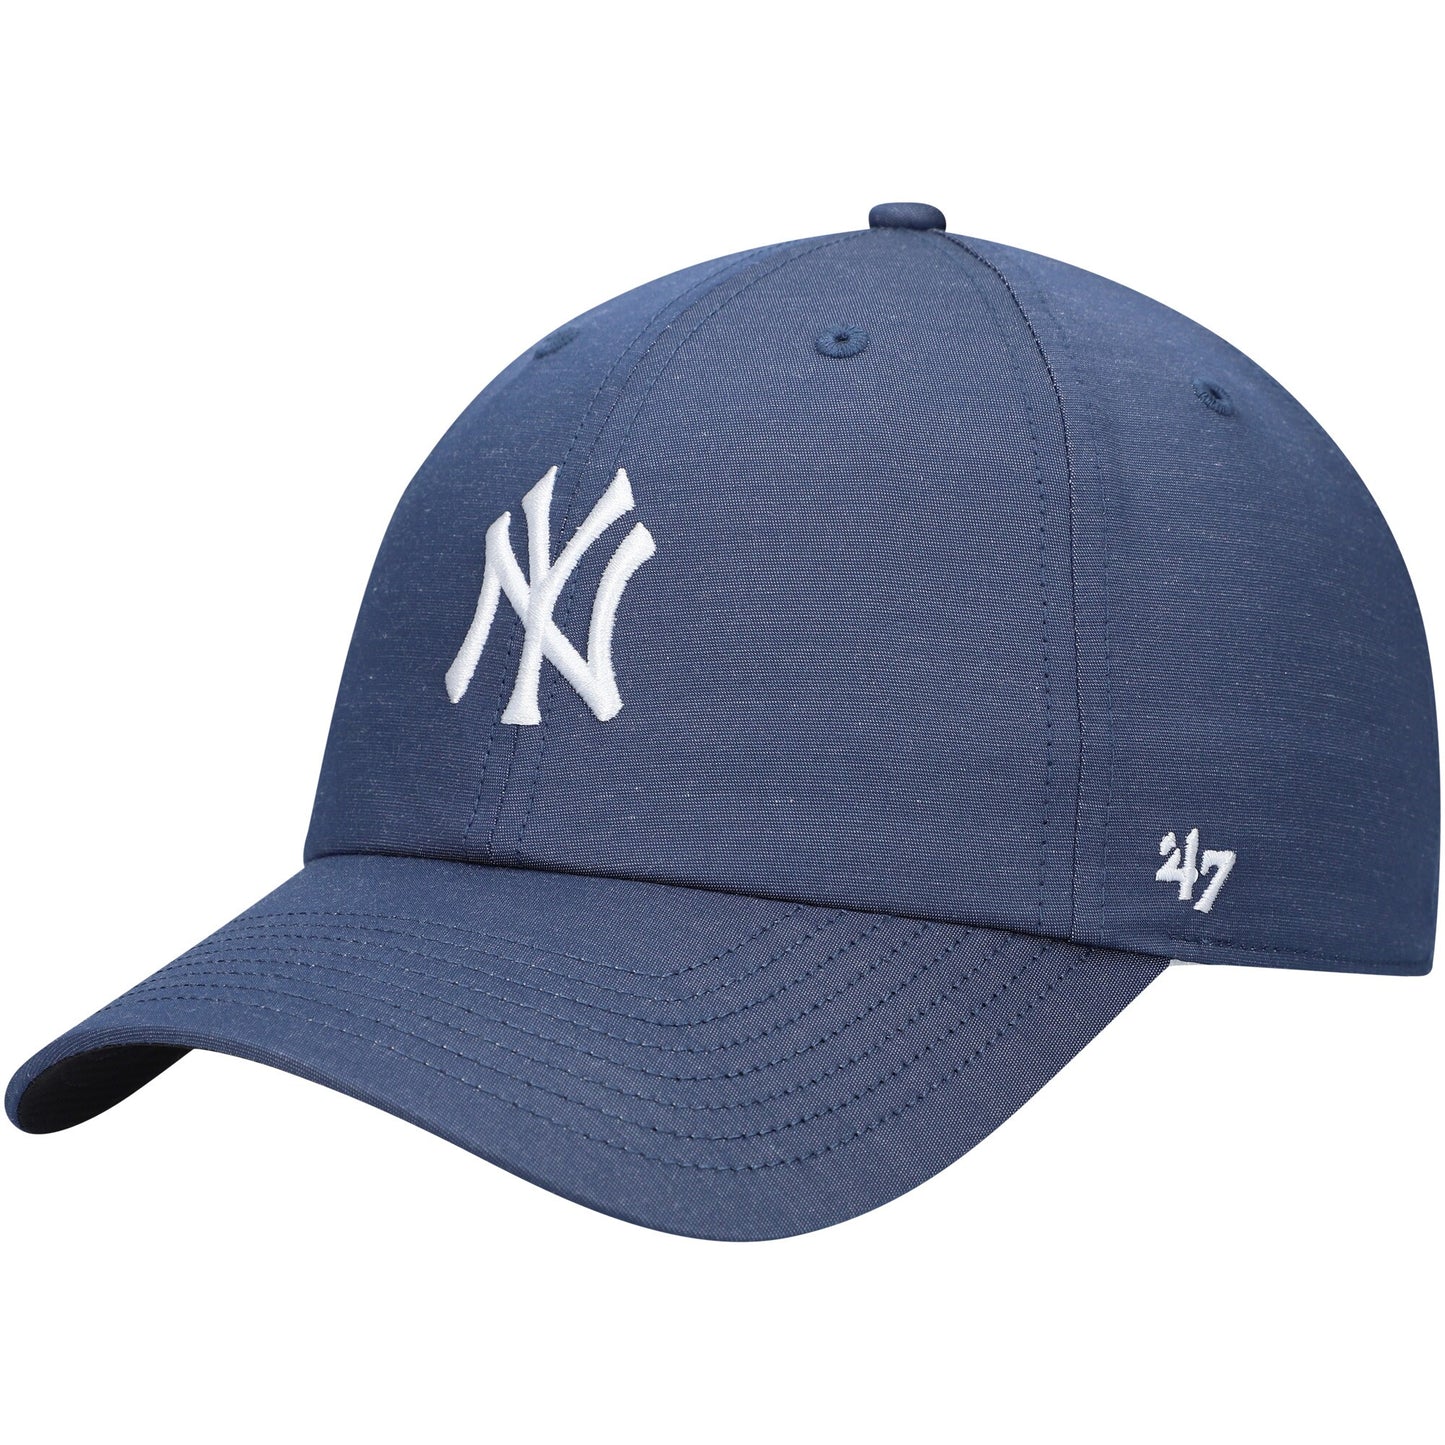 New York Yankees '47 Oxford Tech Clean Up Adjustable Hat - Navy